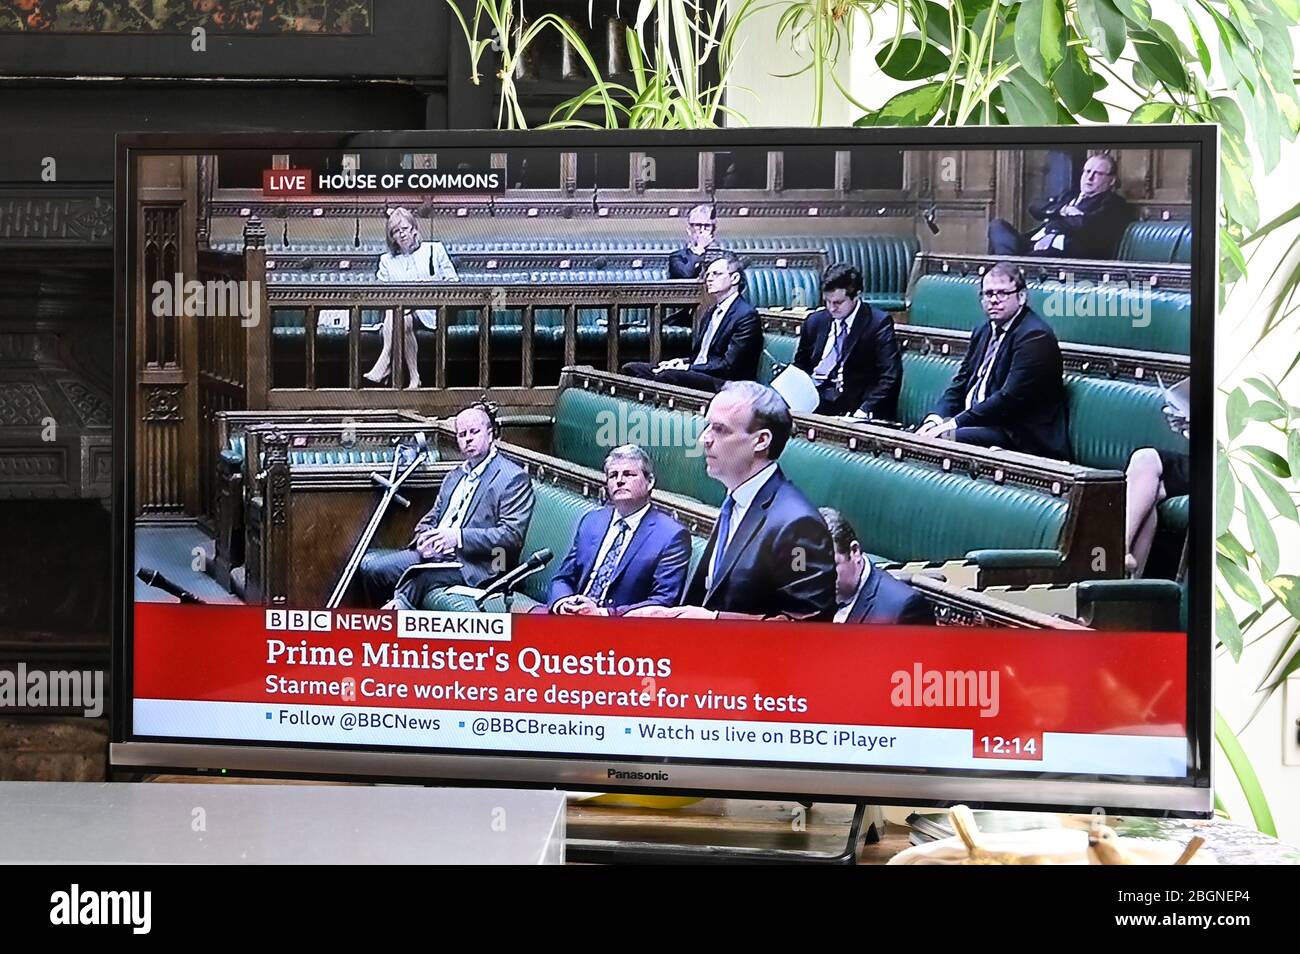 Parliament under new social distancing regulations. The Conservative benches during PMQs. Dominic Raab standing in for the Prime Minister B Johnson. Stock Photo